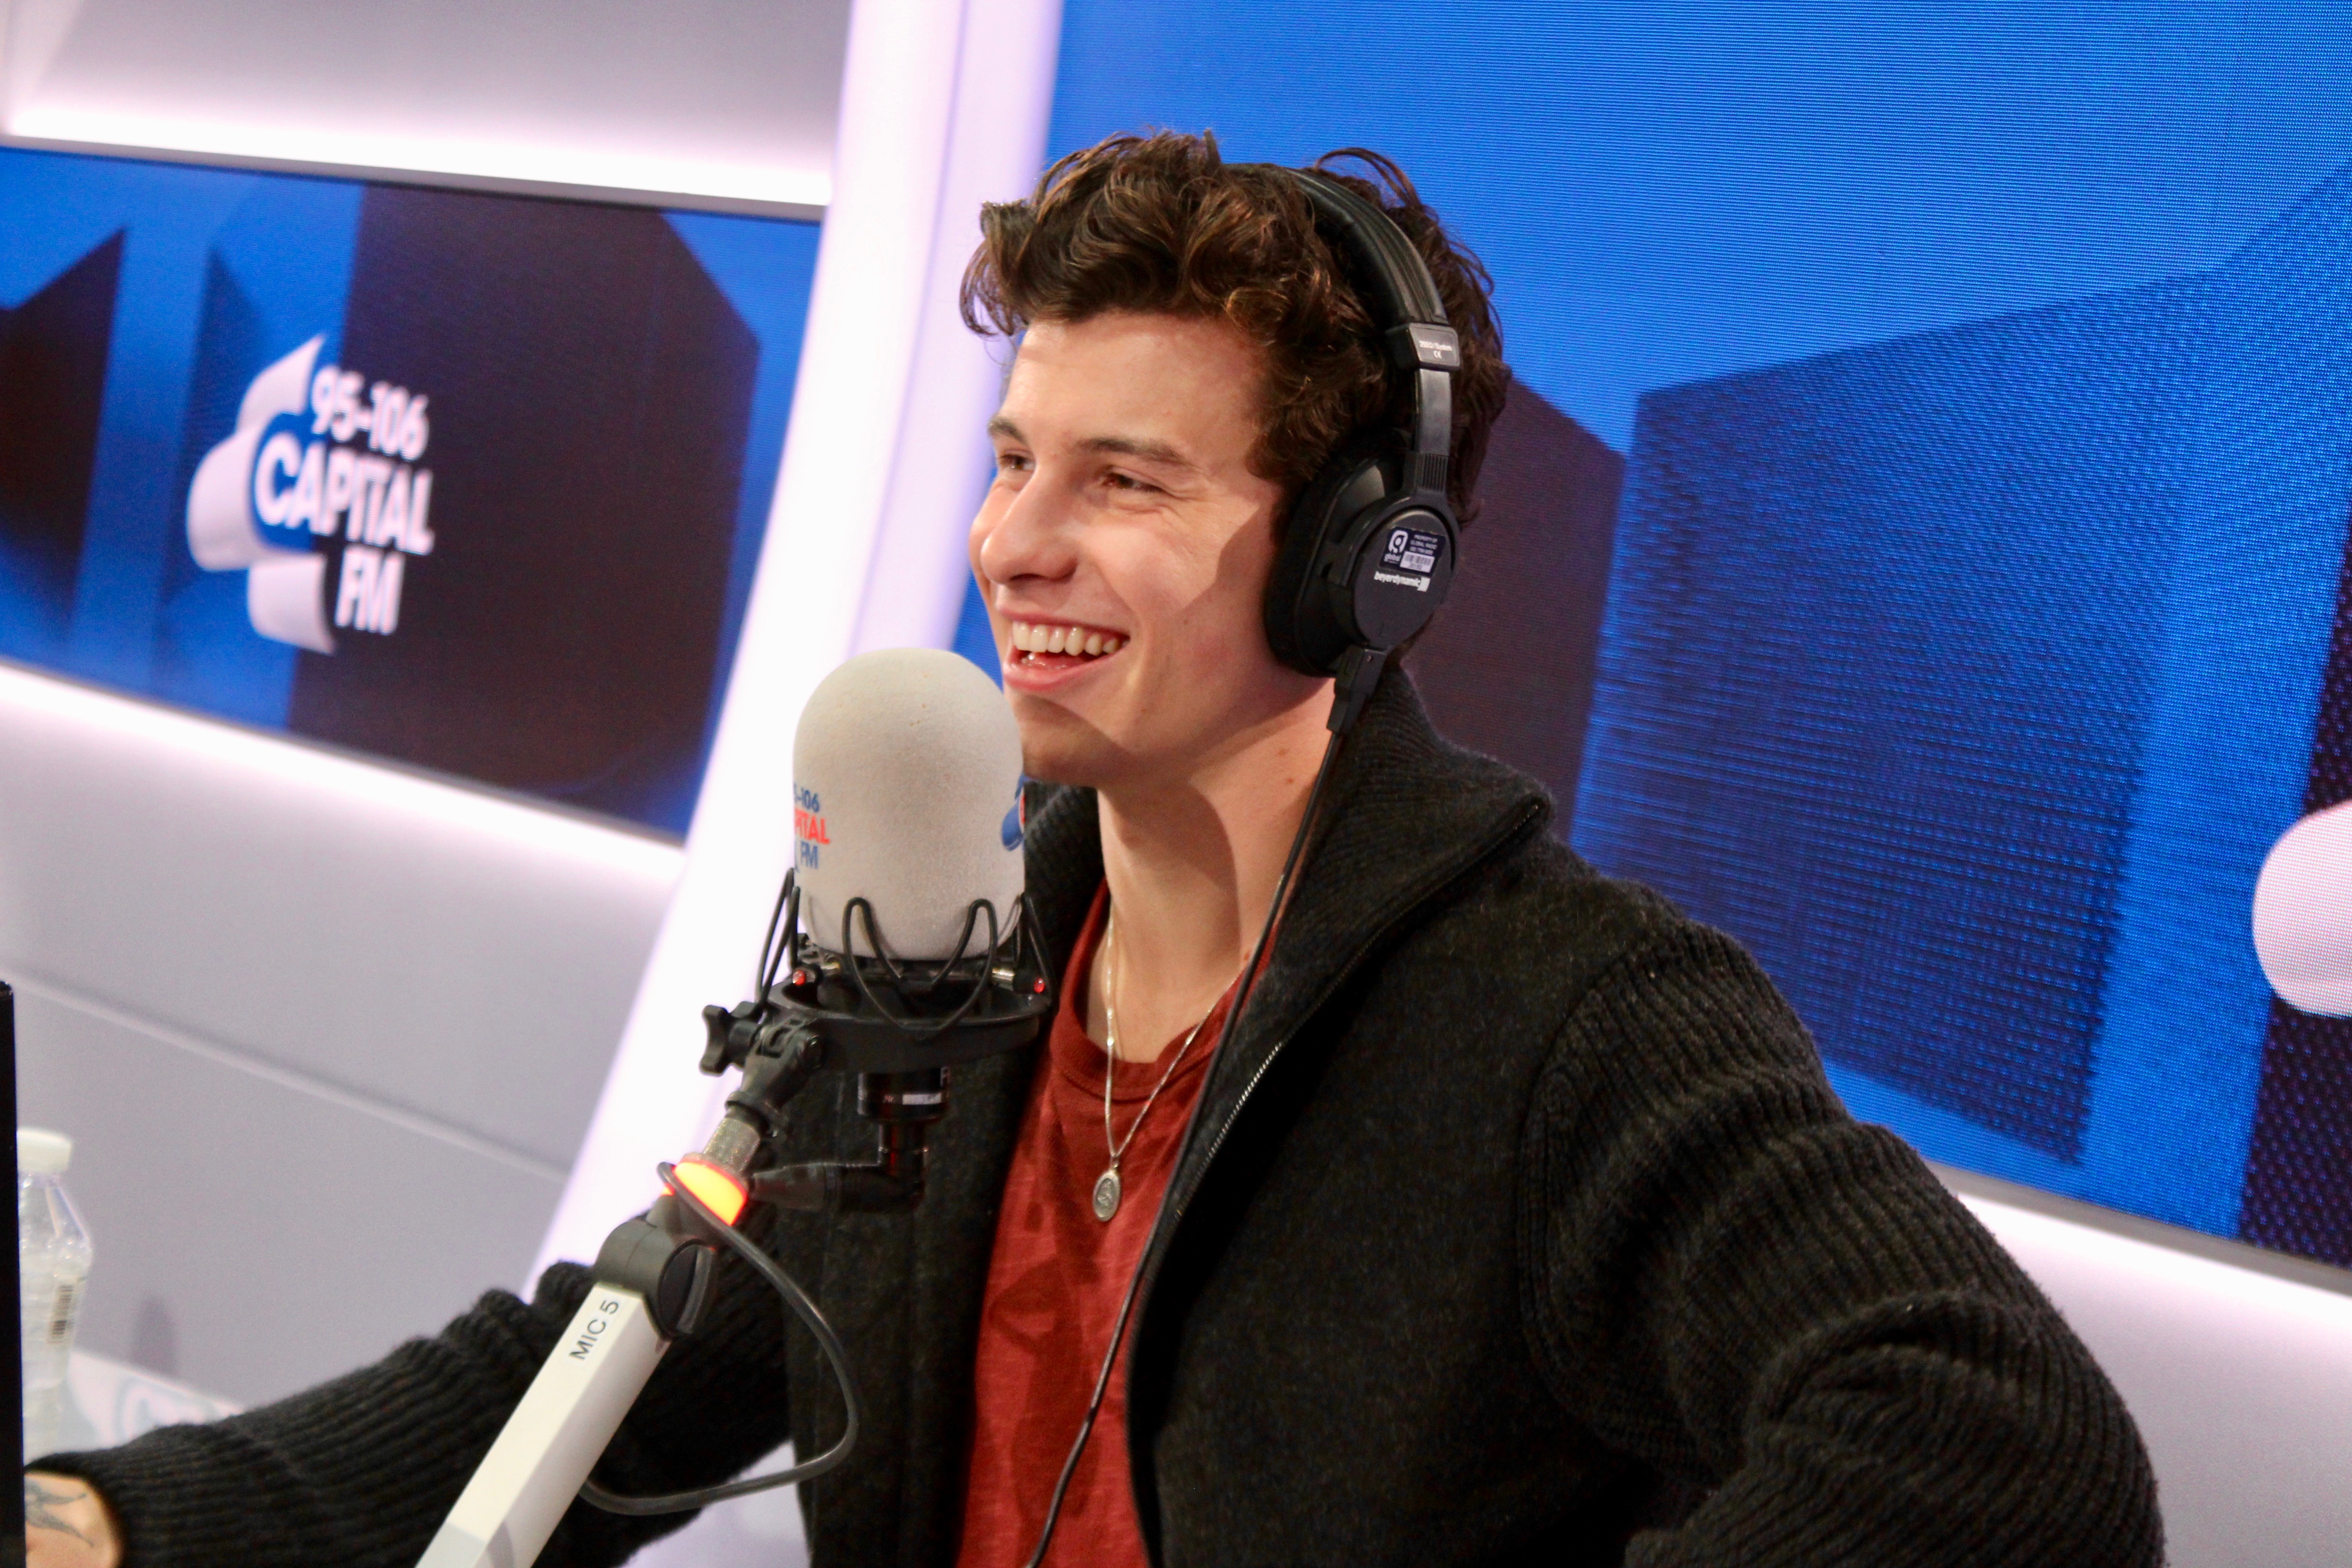 Shawn Mendes on Capital Breakfast with Roman Kemp